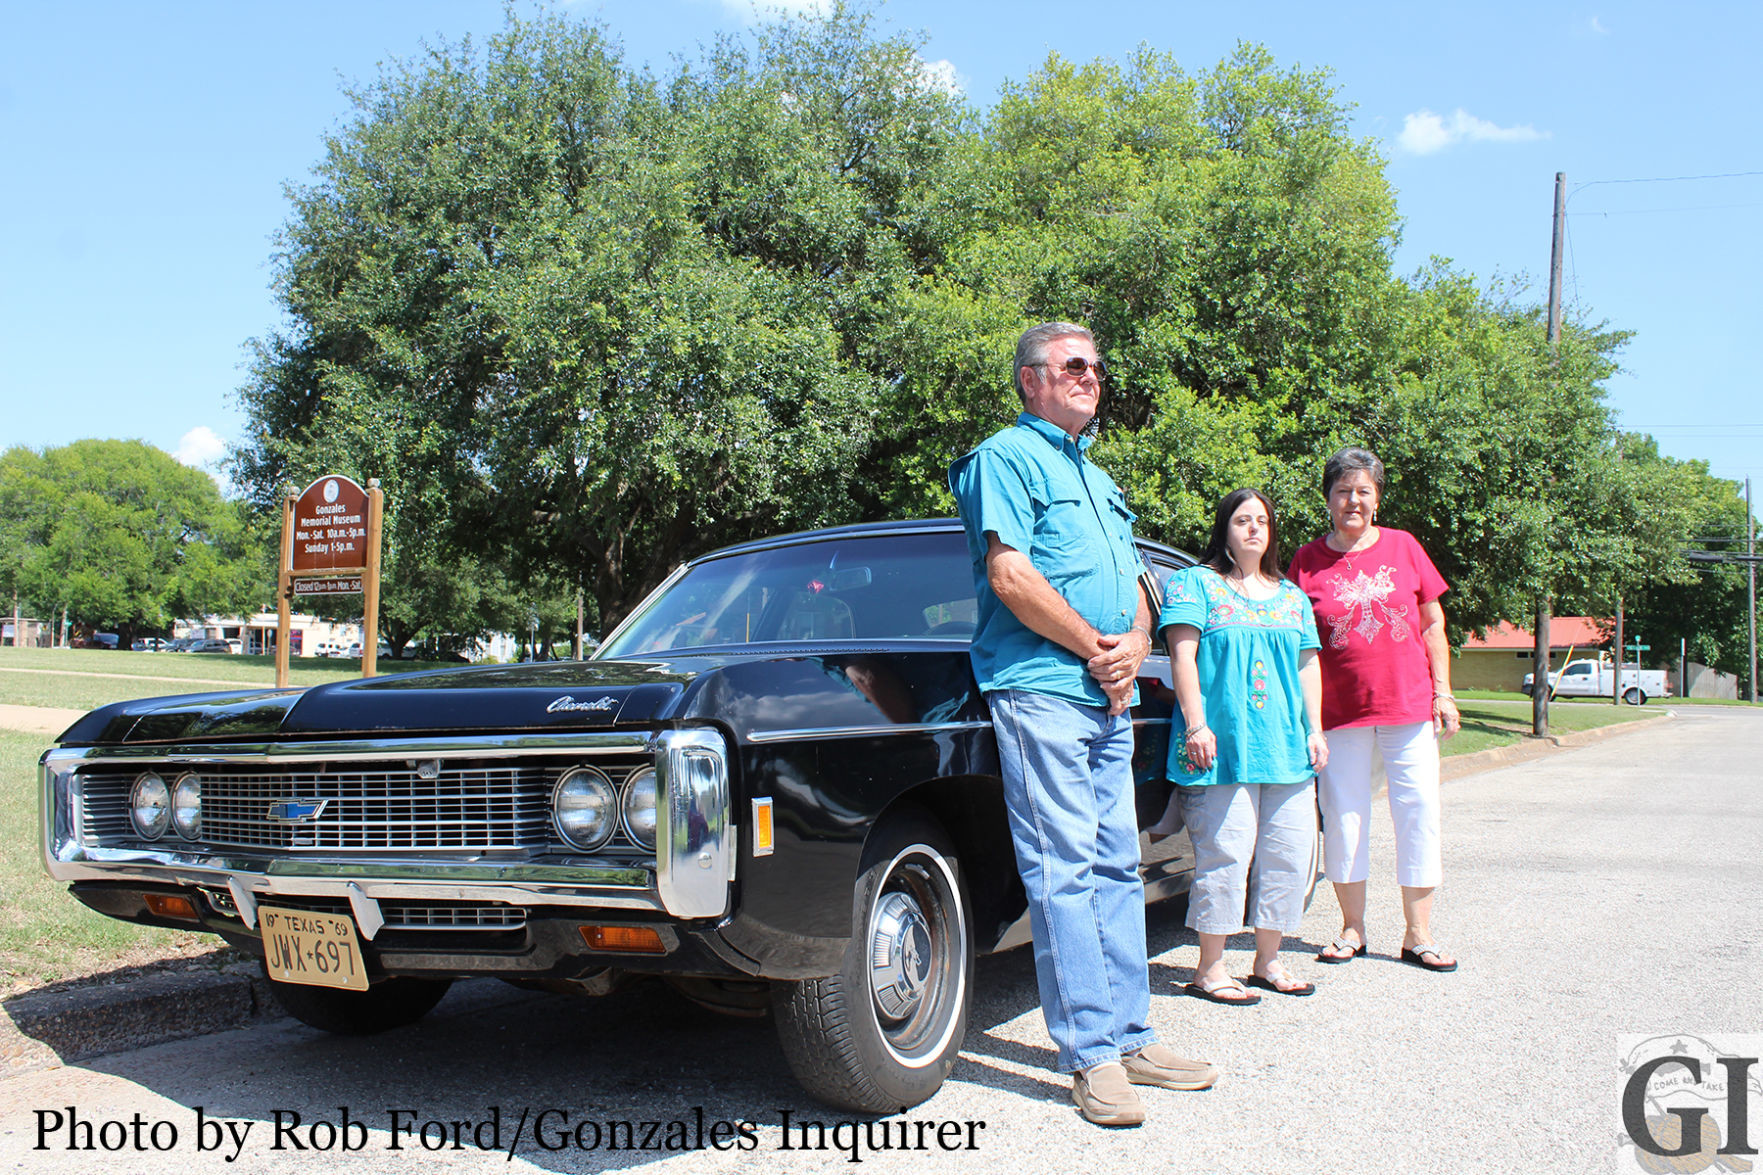 Tommy Schurig developed his love of classic cars when he inherited this one - a 1969 Chevrolet Bel Air - from his uncle back in 2001.